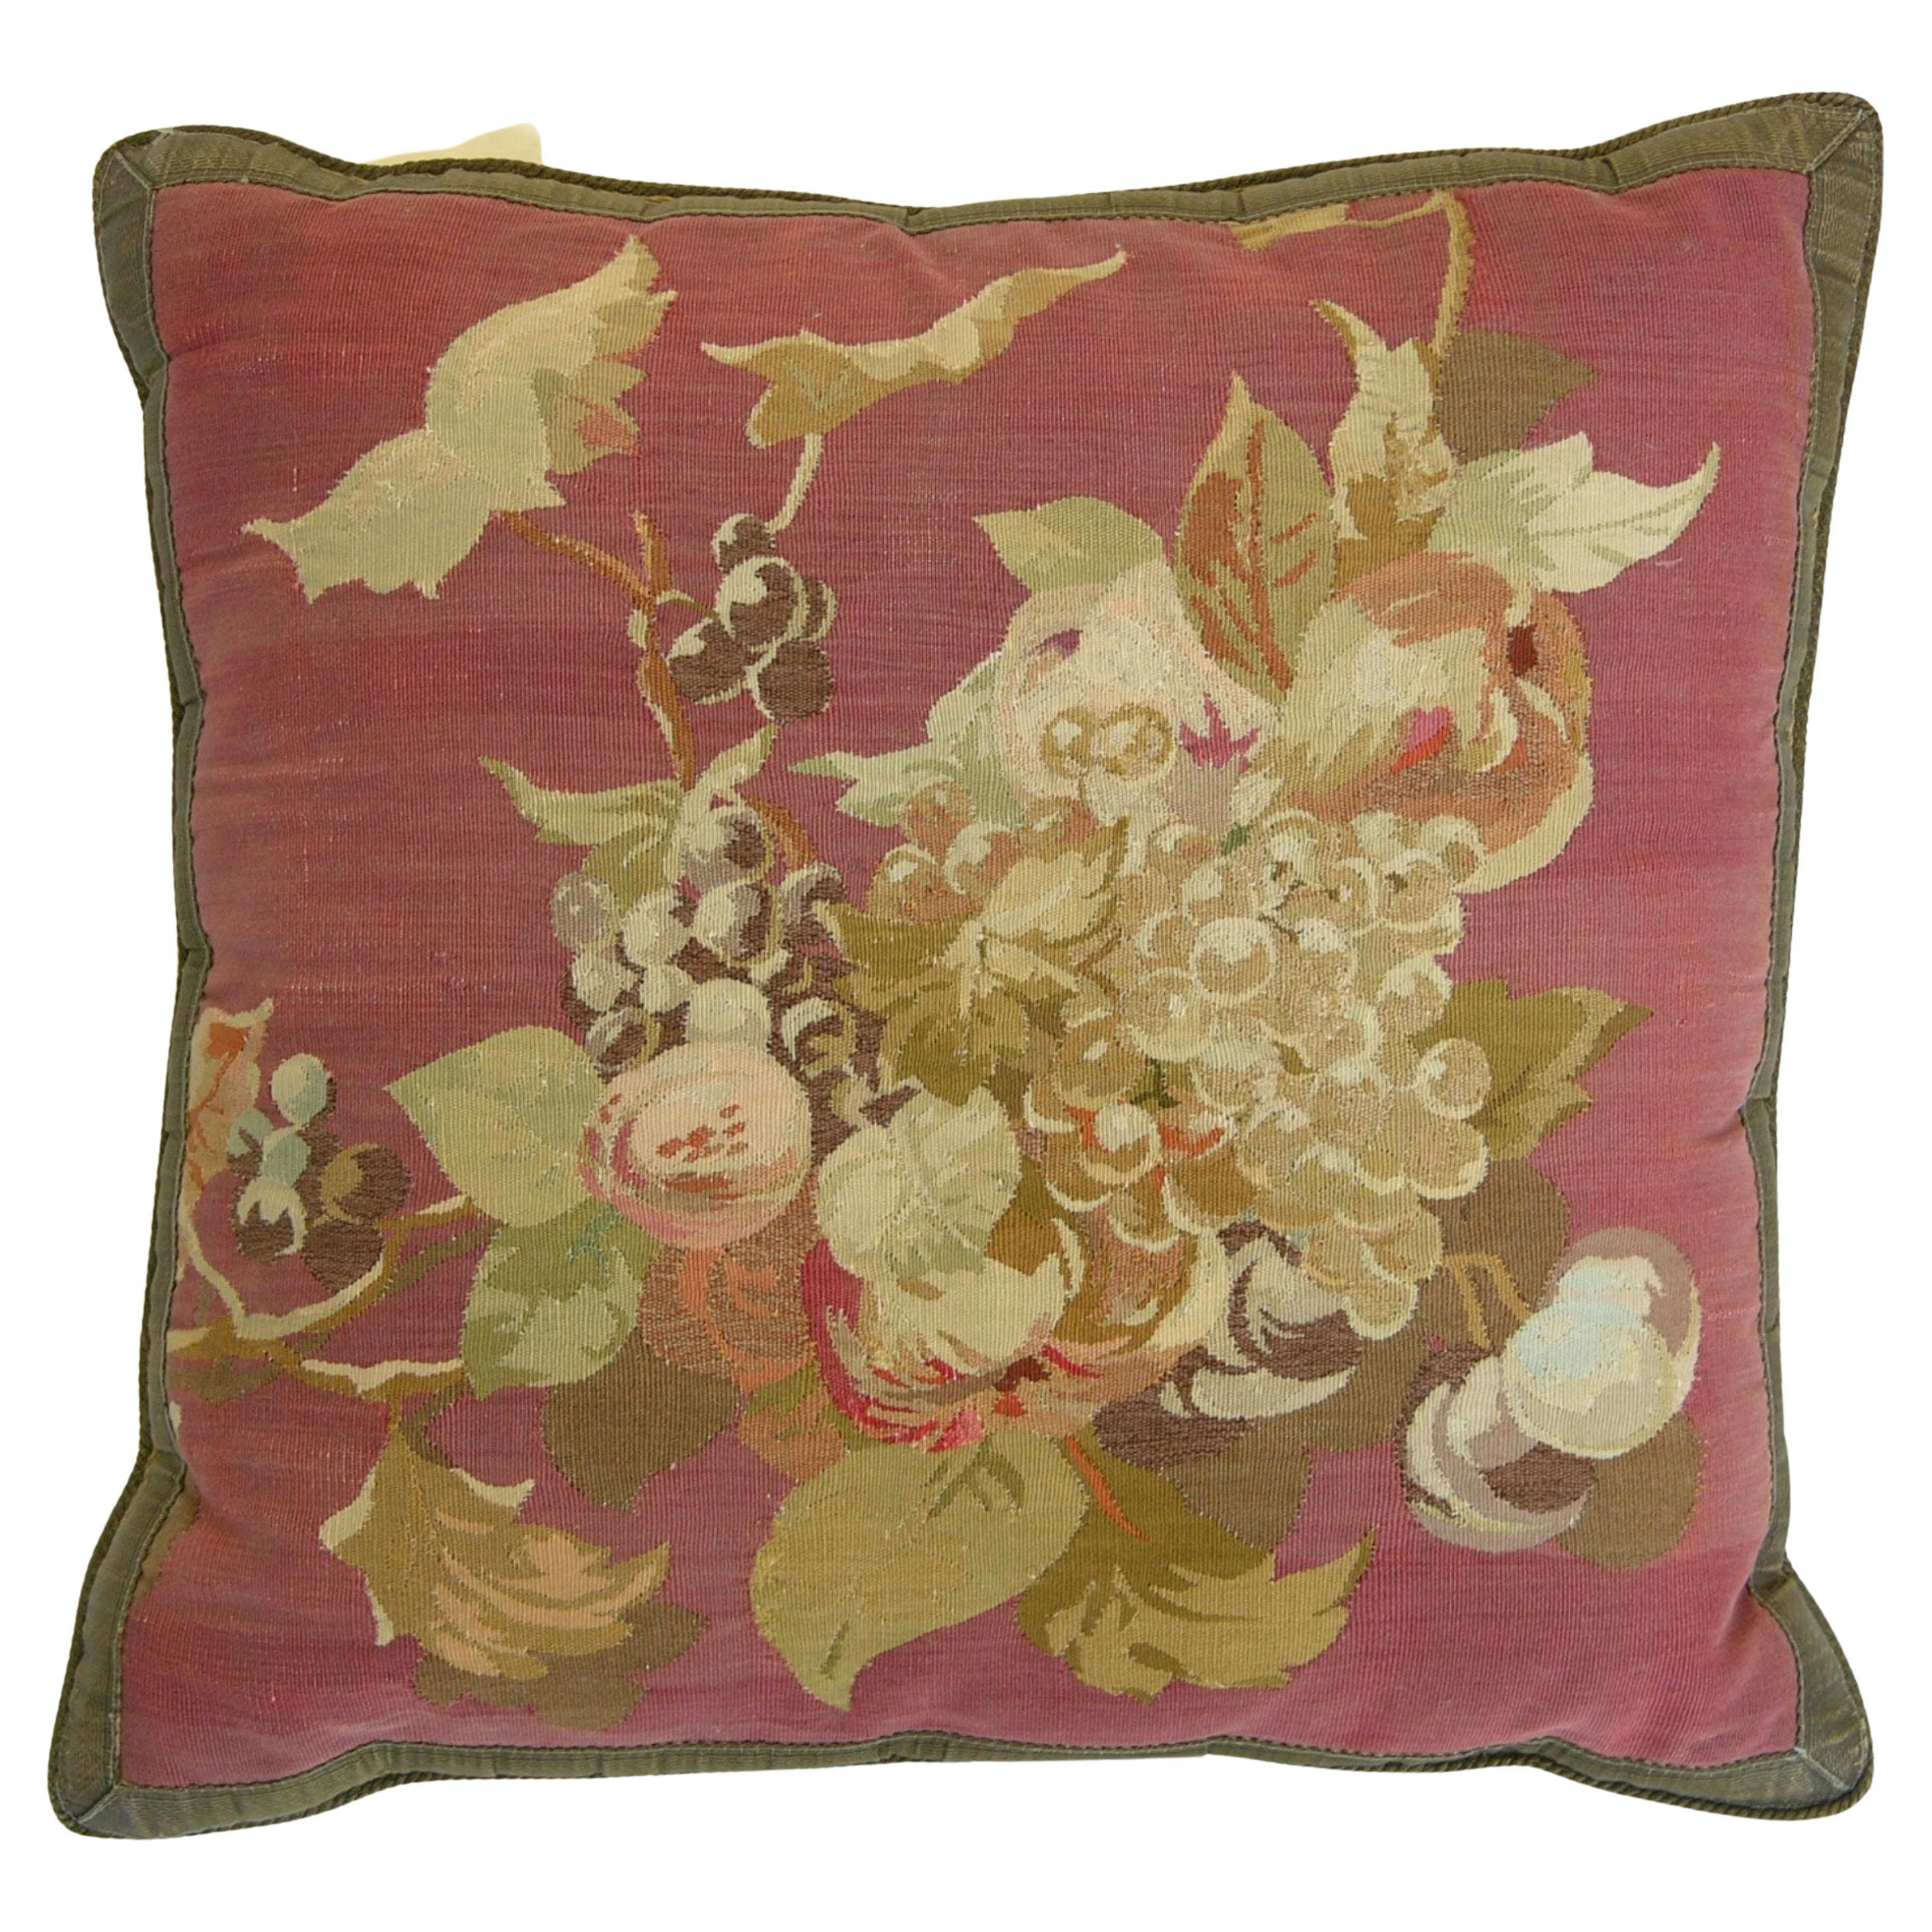 Circa 18th Century Antique French Aubusson Tapestry Pillow